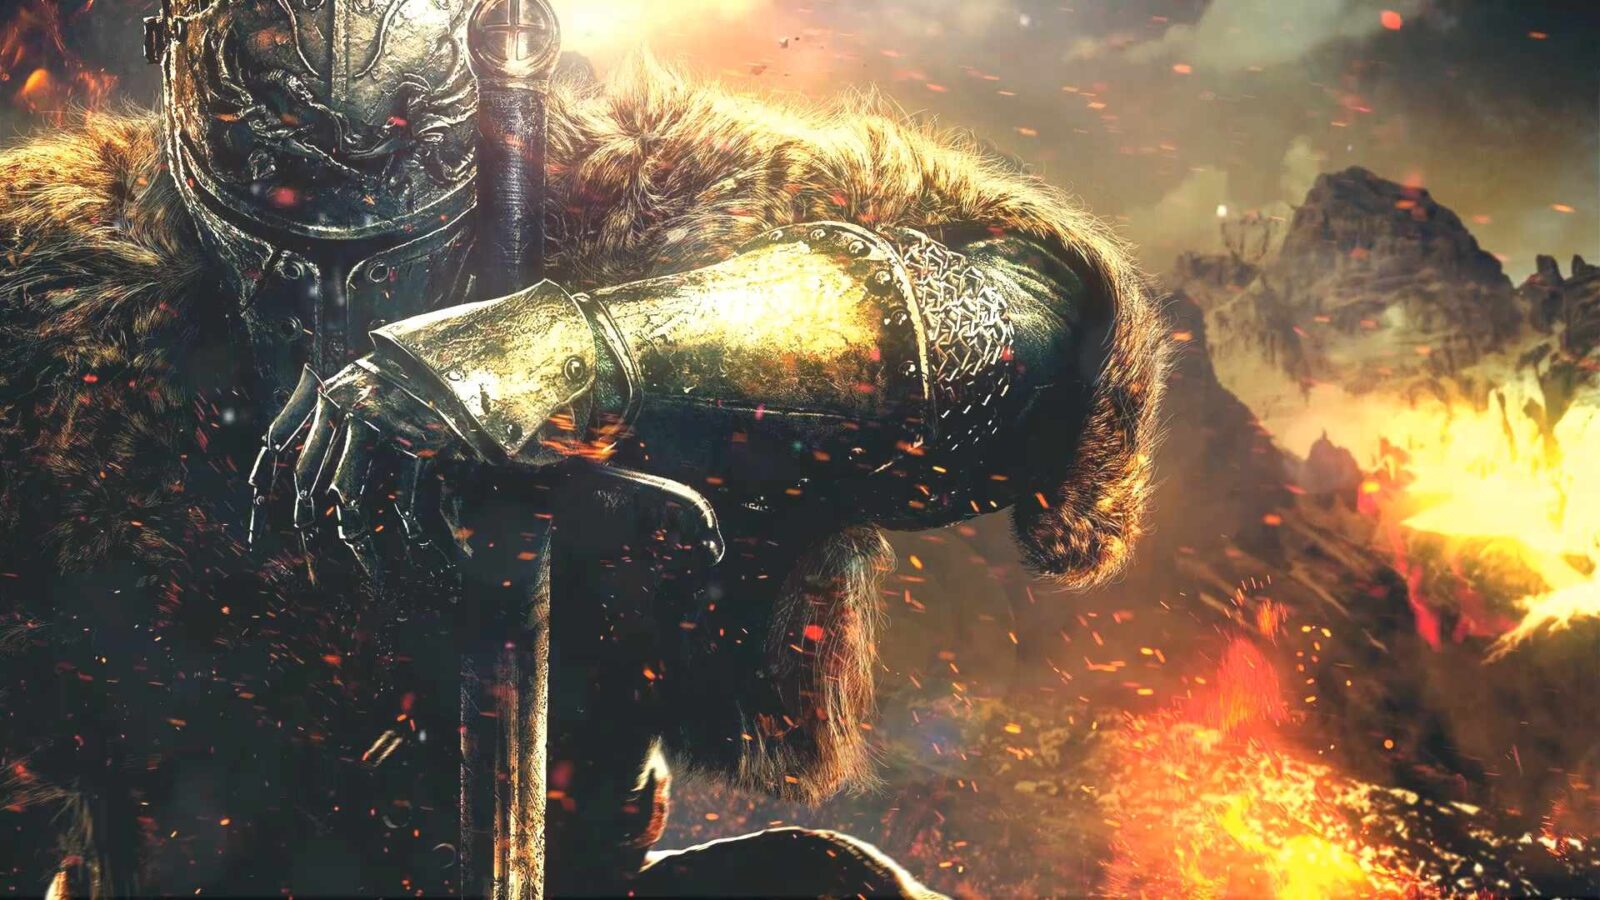 Dark Souls Warrior and Sparks Of Fire - Free Live Wallpaper - Live